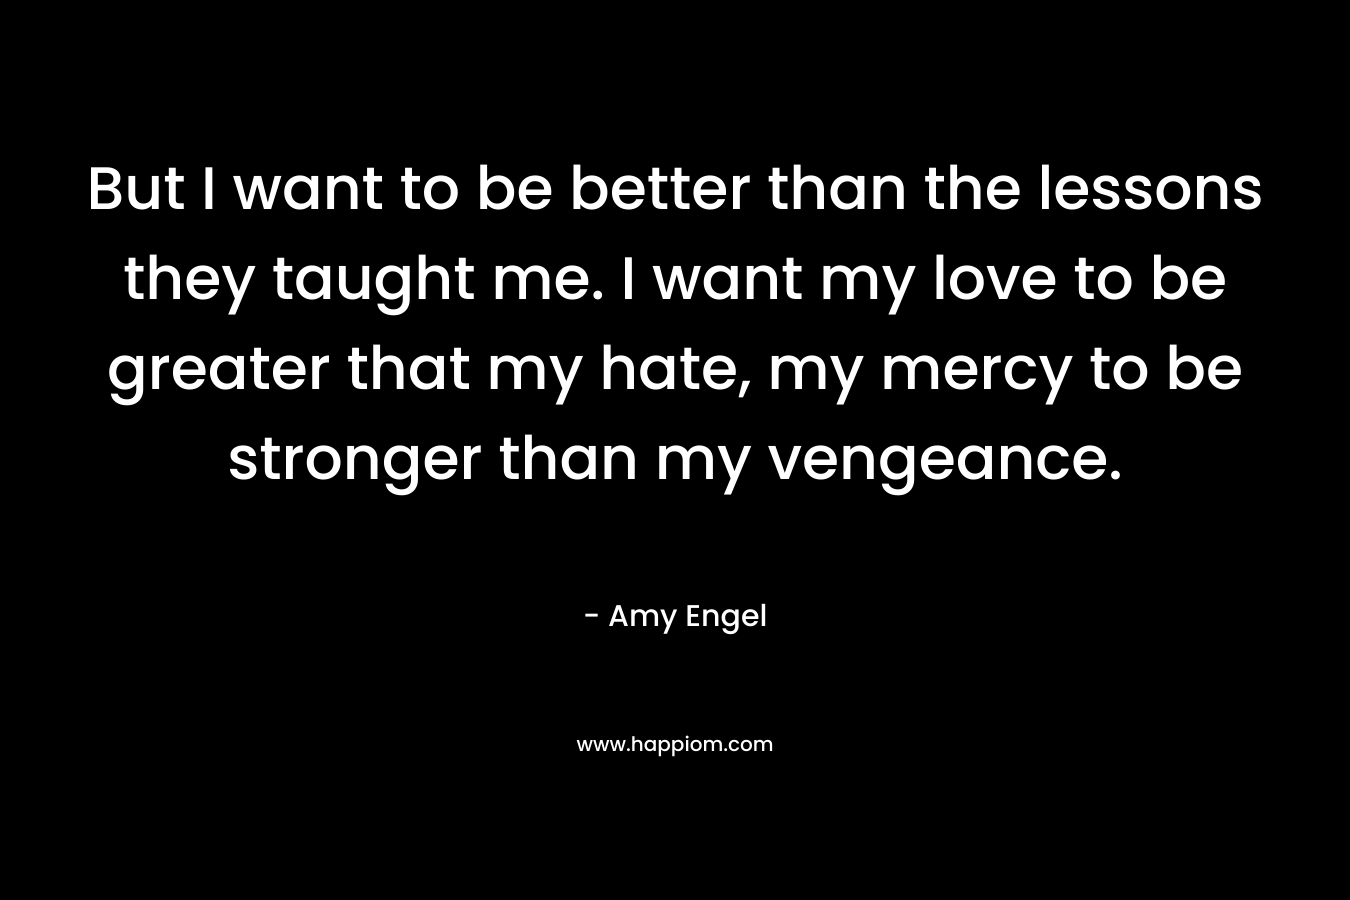 But I want to be better than the lessons they taught me. I want my love to be greater that my hate, my mercy to be stronger than my vengeance. – Amy Engel